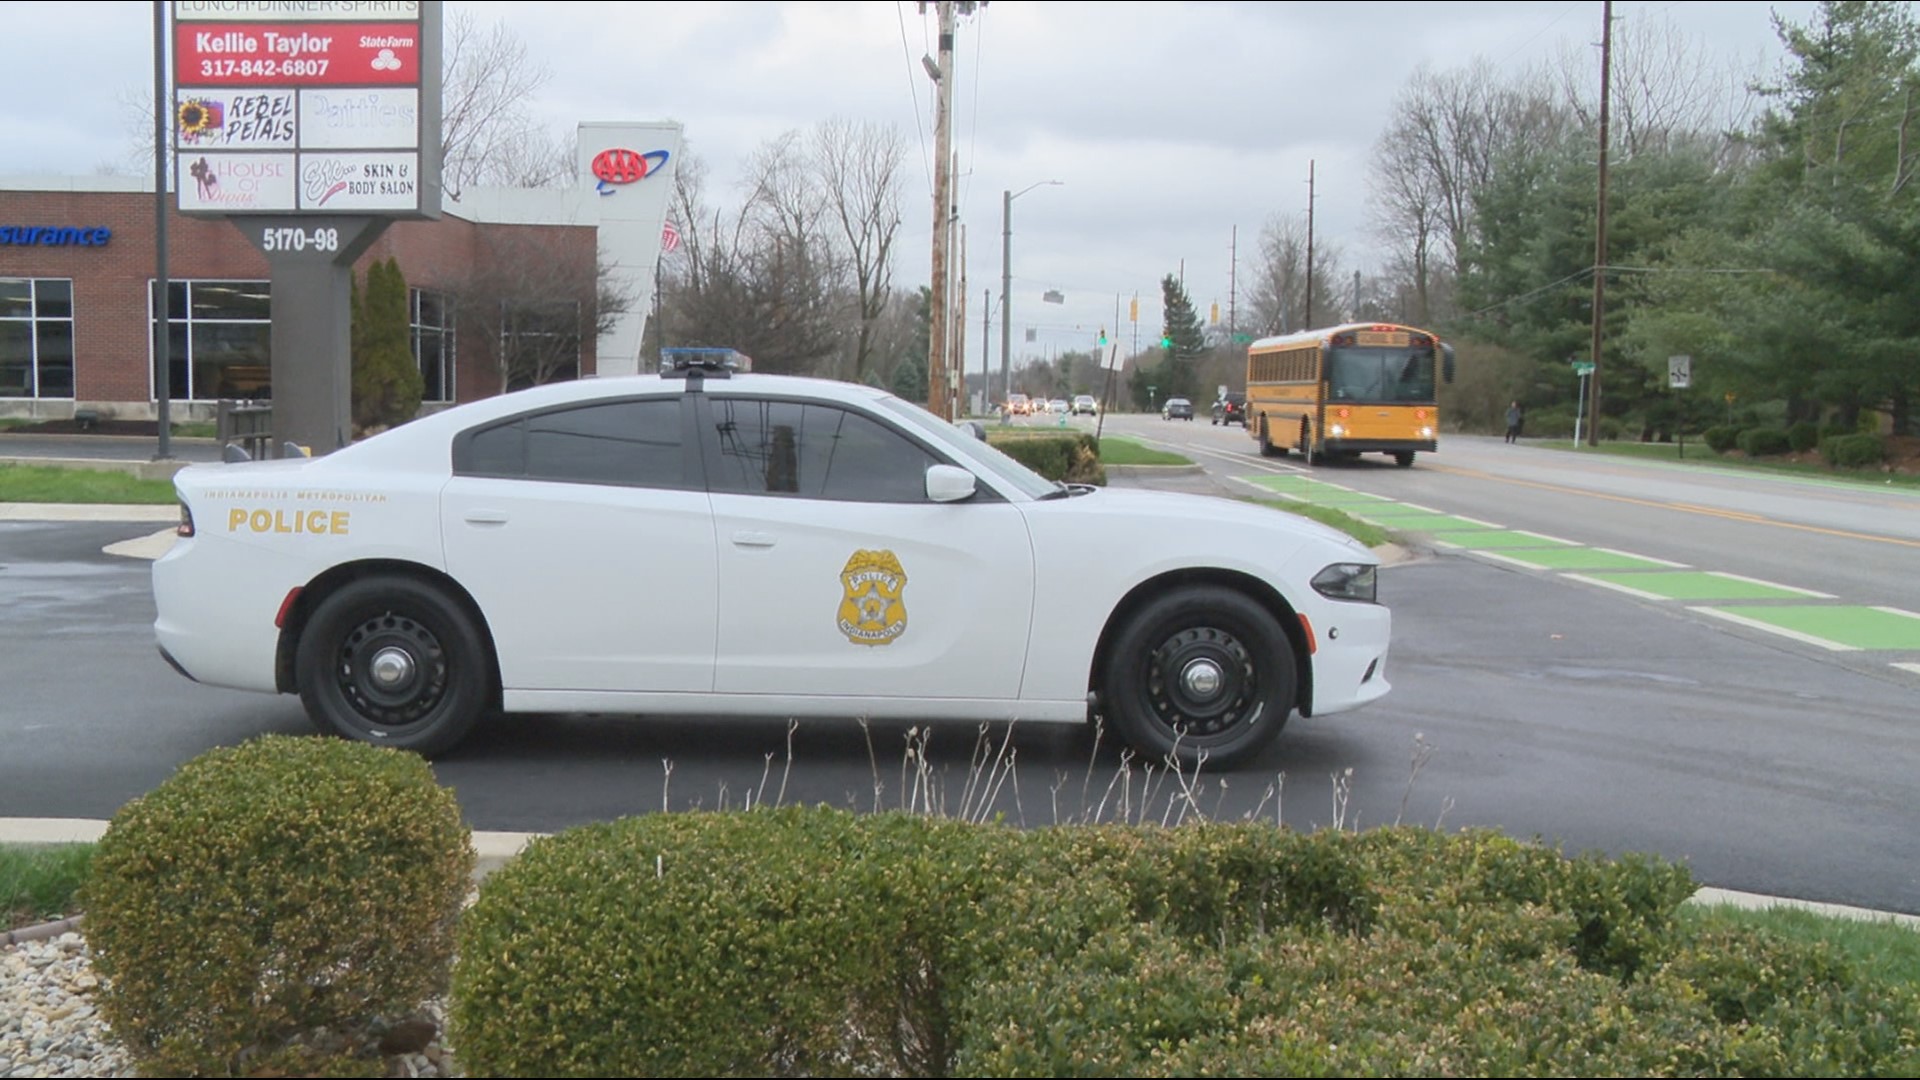 13News rode along with Officer Patrick Scott to see what police witness firsthand.